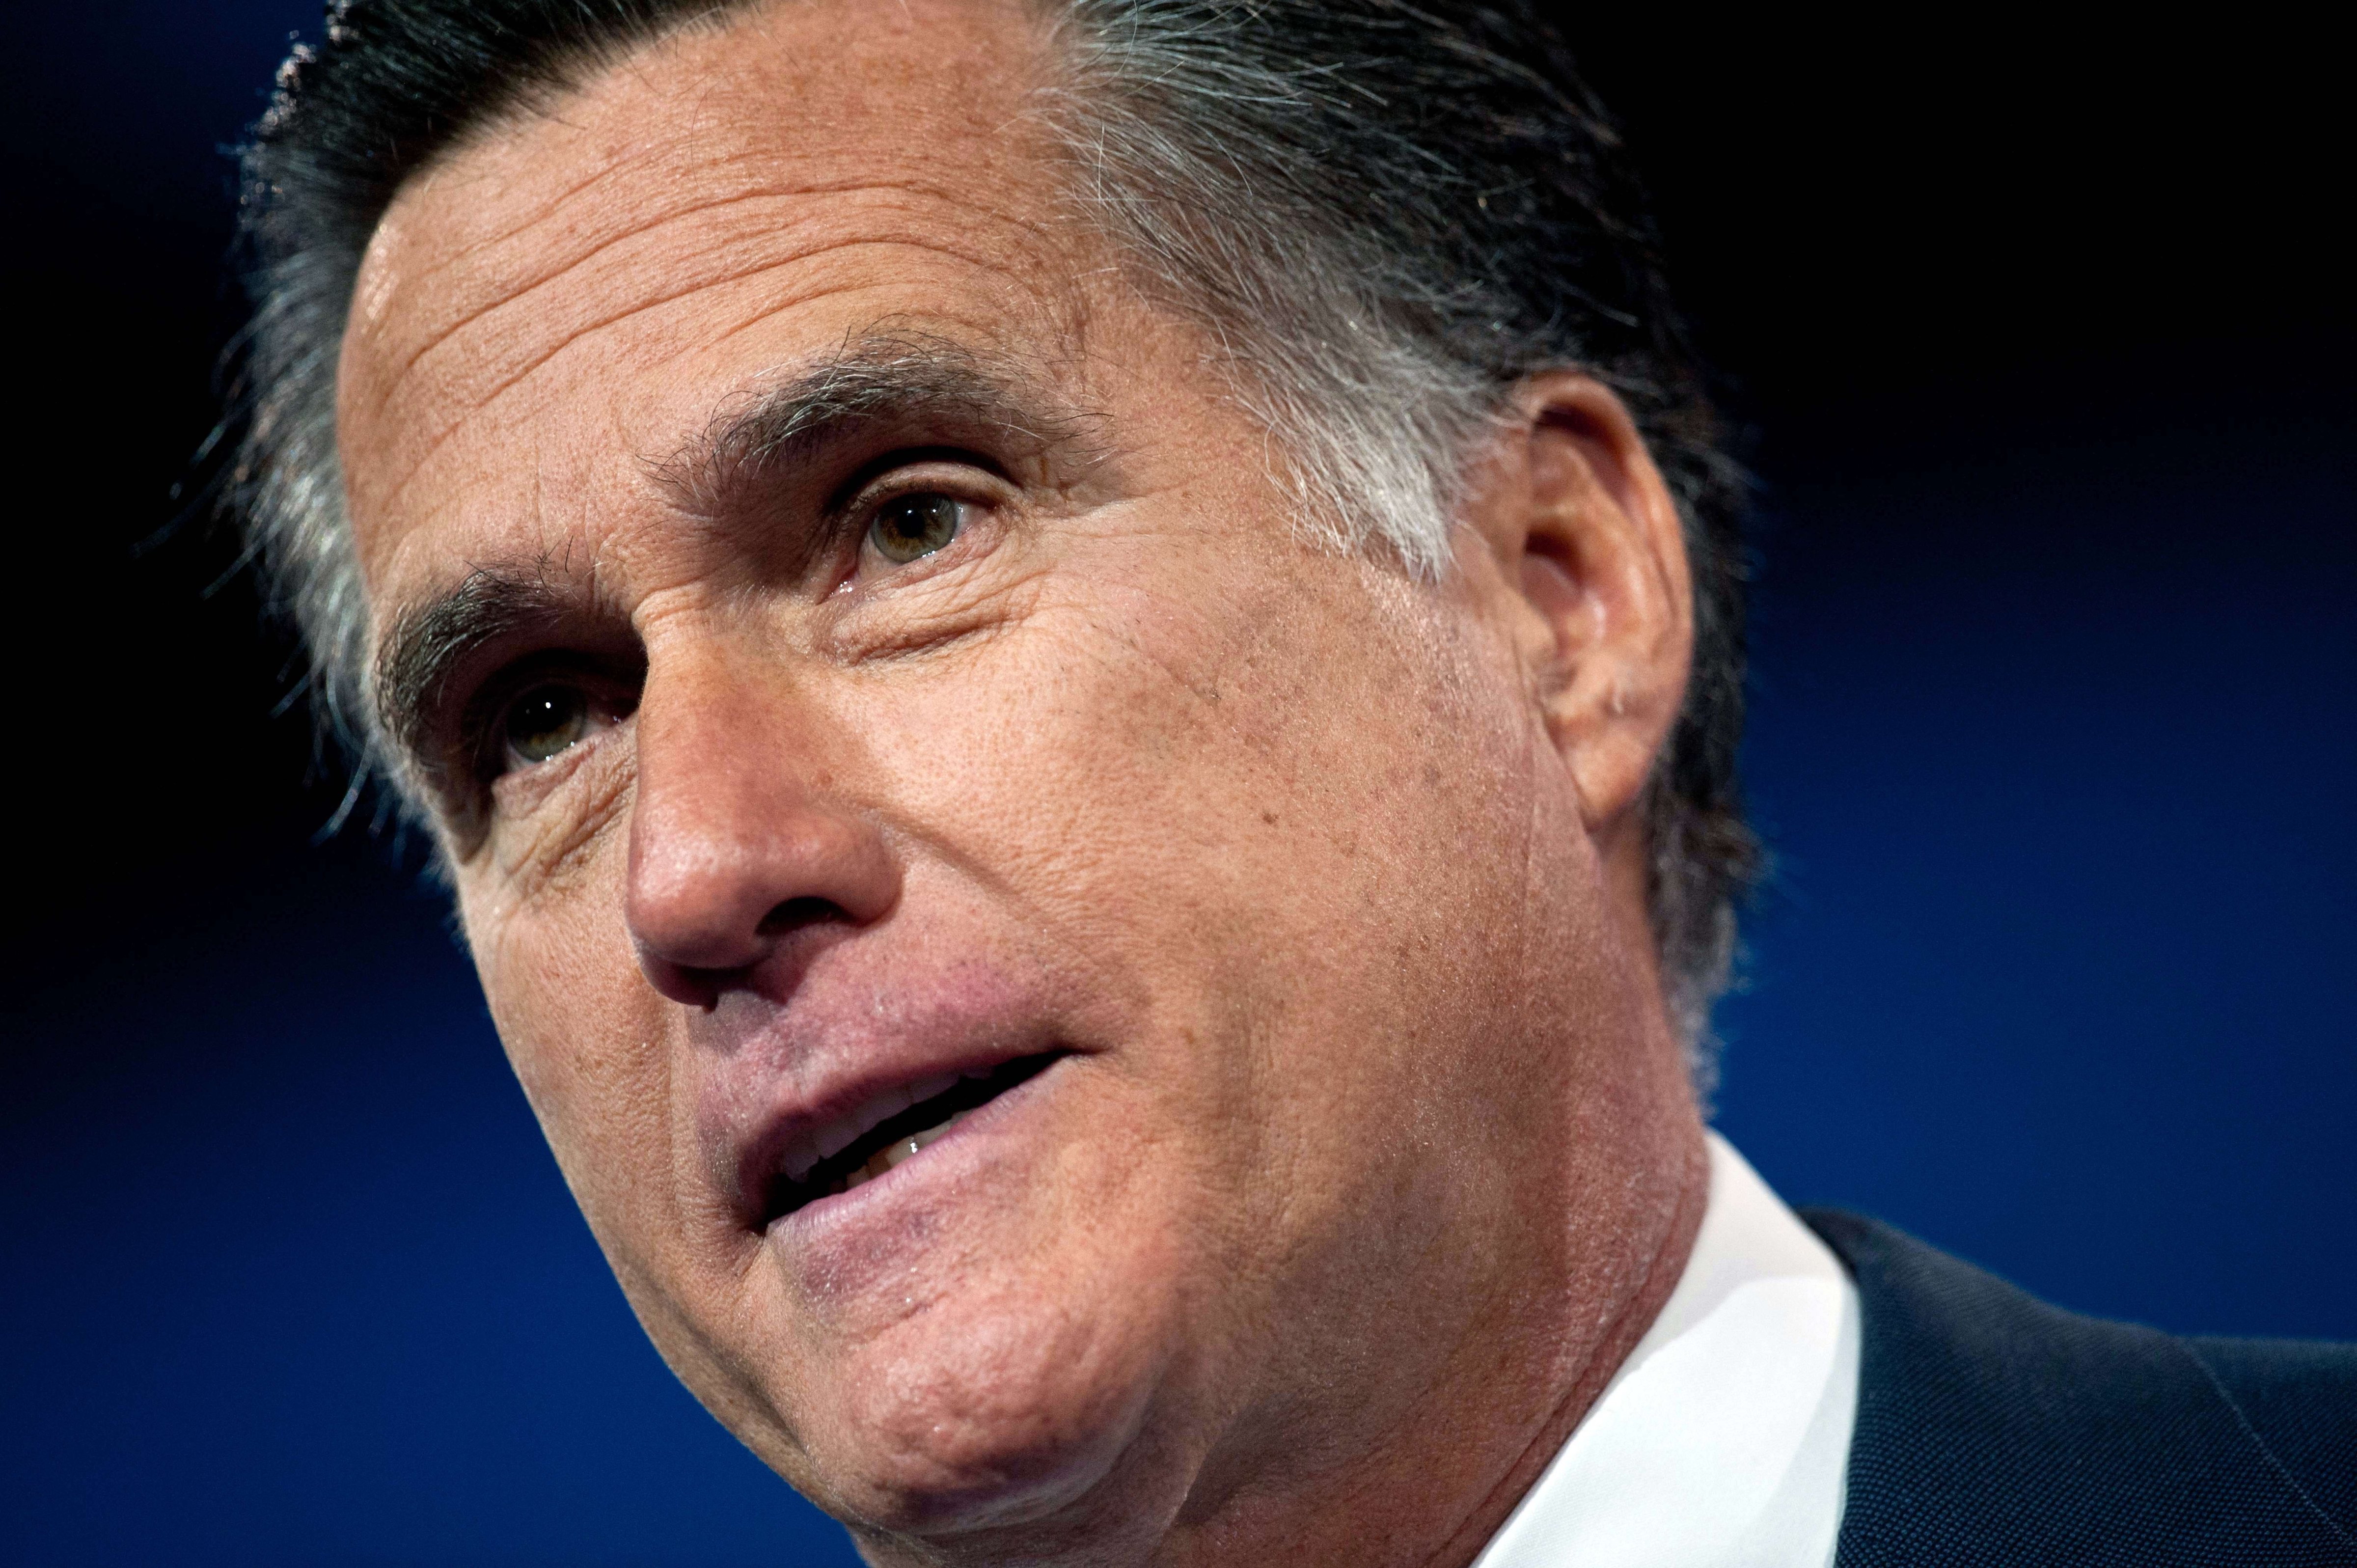 Former Republican presidential candidate Mitt Romney at the Conservative Political Action Conference (CPAC) in National Harbor, Maryland in 2013. (Nicholas Kamm—AFP/Getty Images)